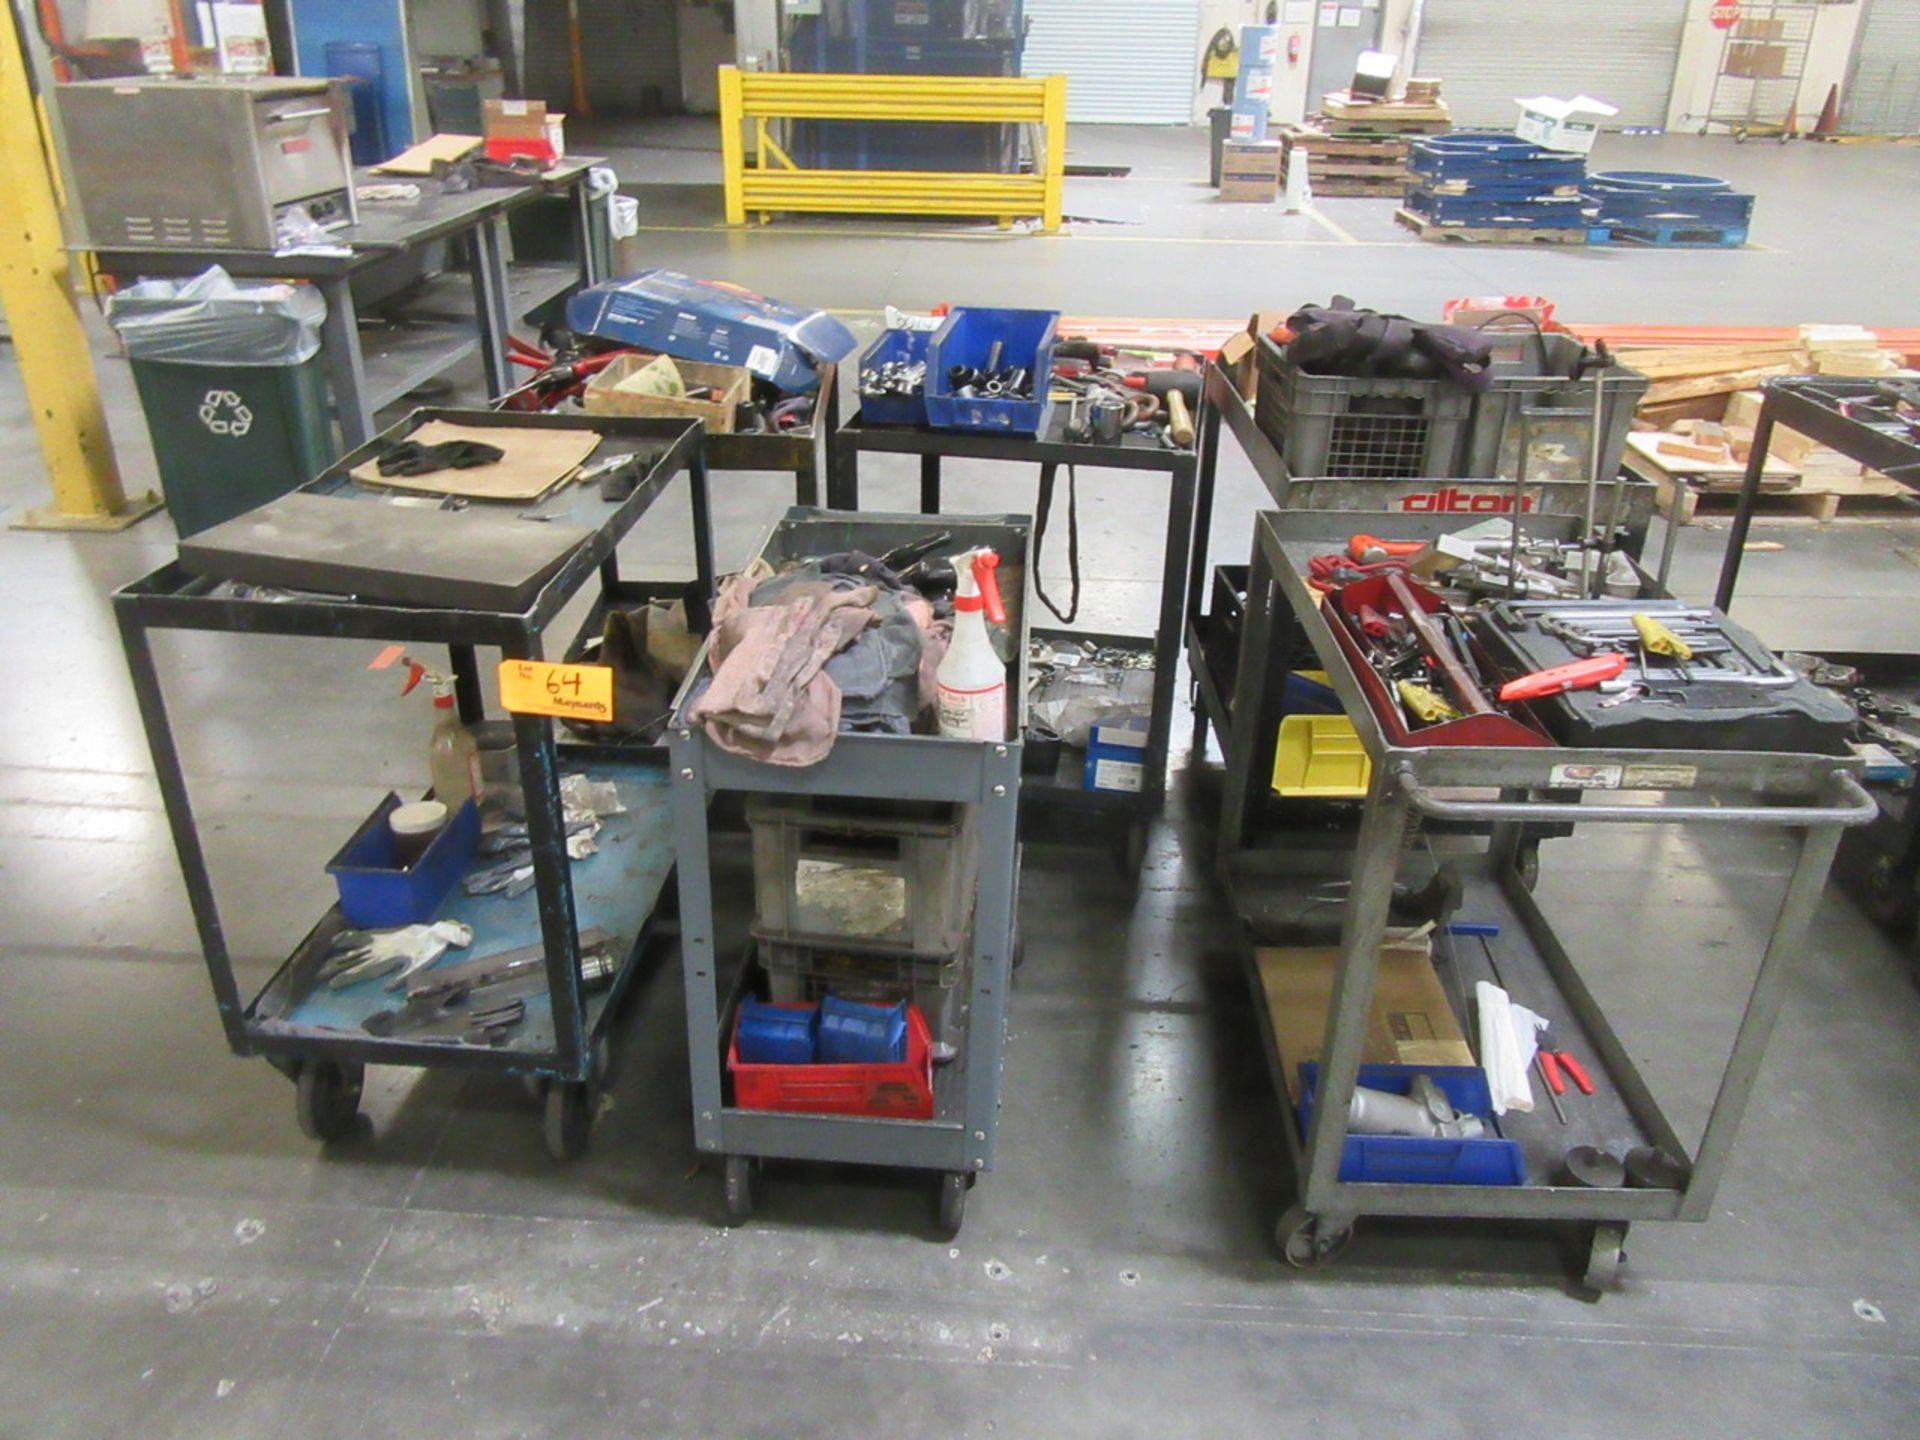 (6) Shop Carts with contents